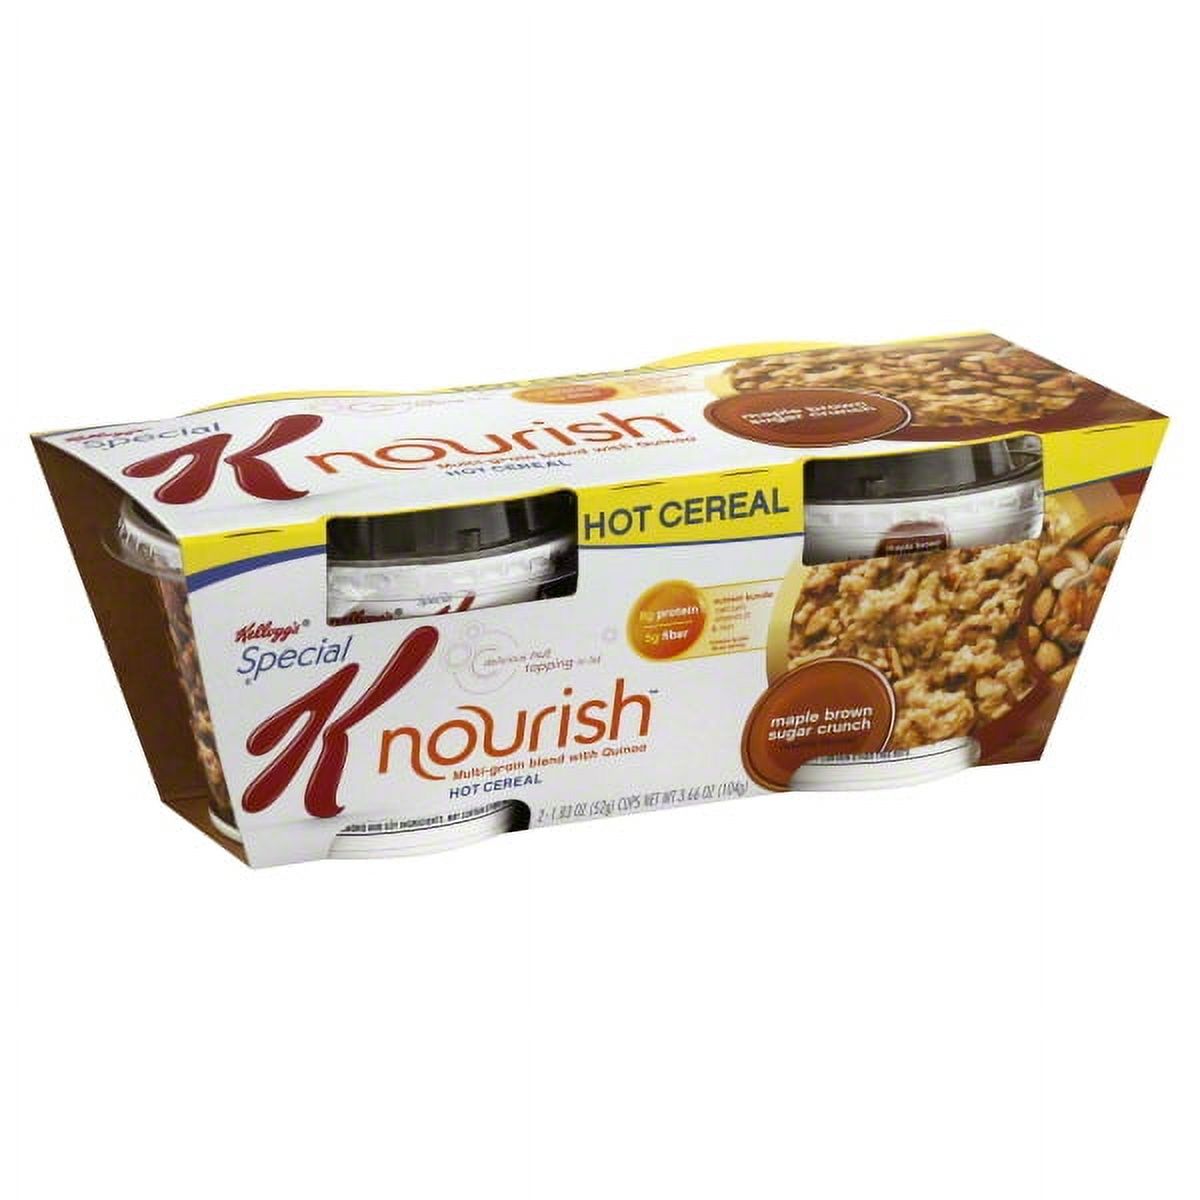 Kellogg's Special K Maple Brown Sugar Crunch Hot Cereal, 1.83 oz, 2 ct - image 1 of 5